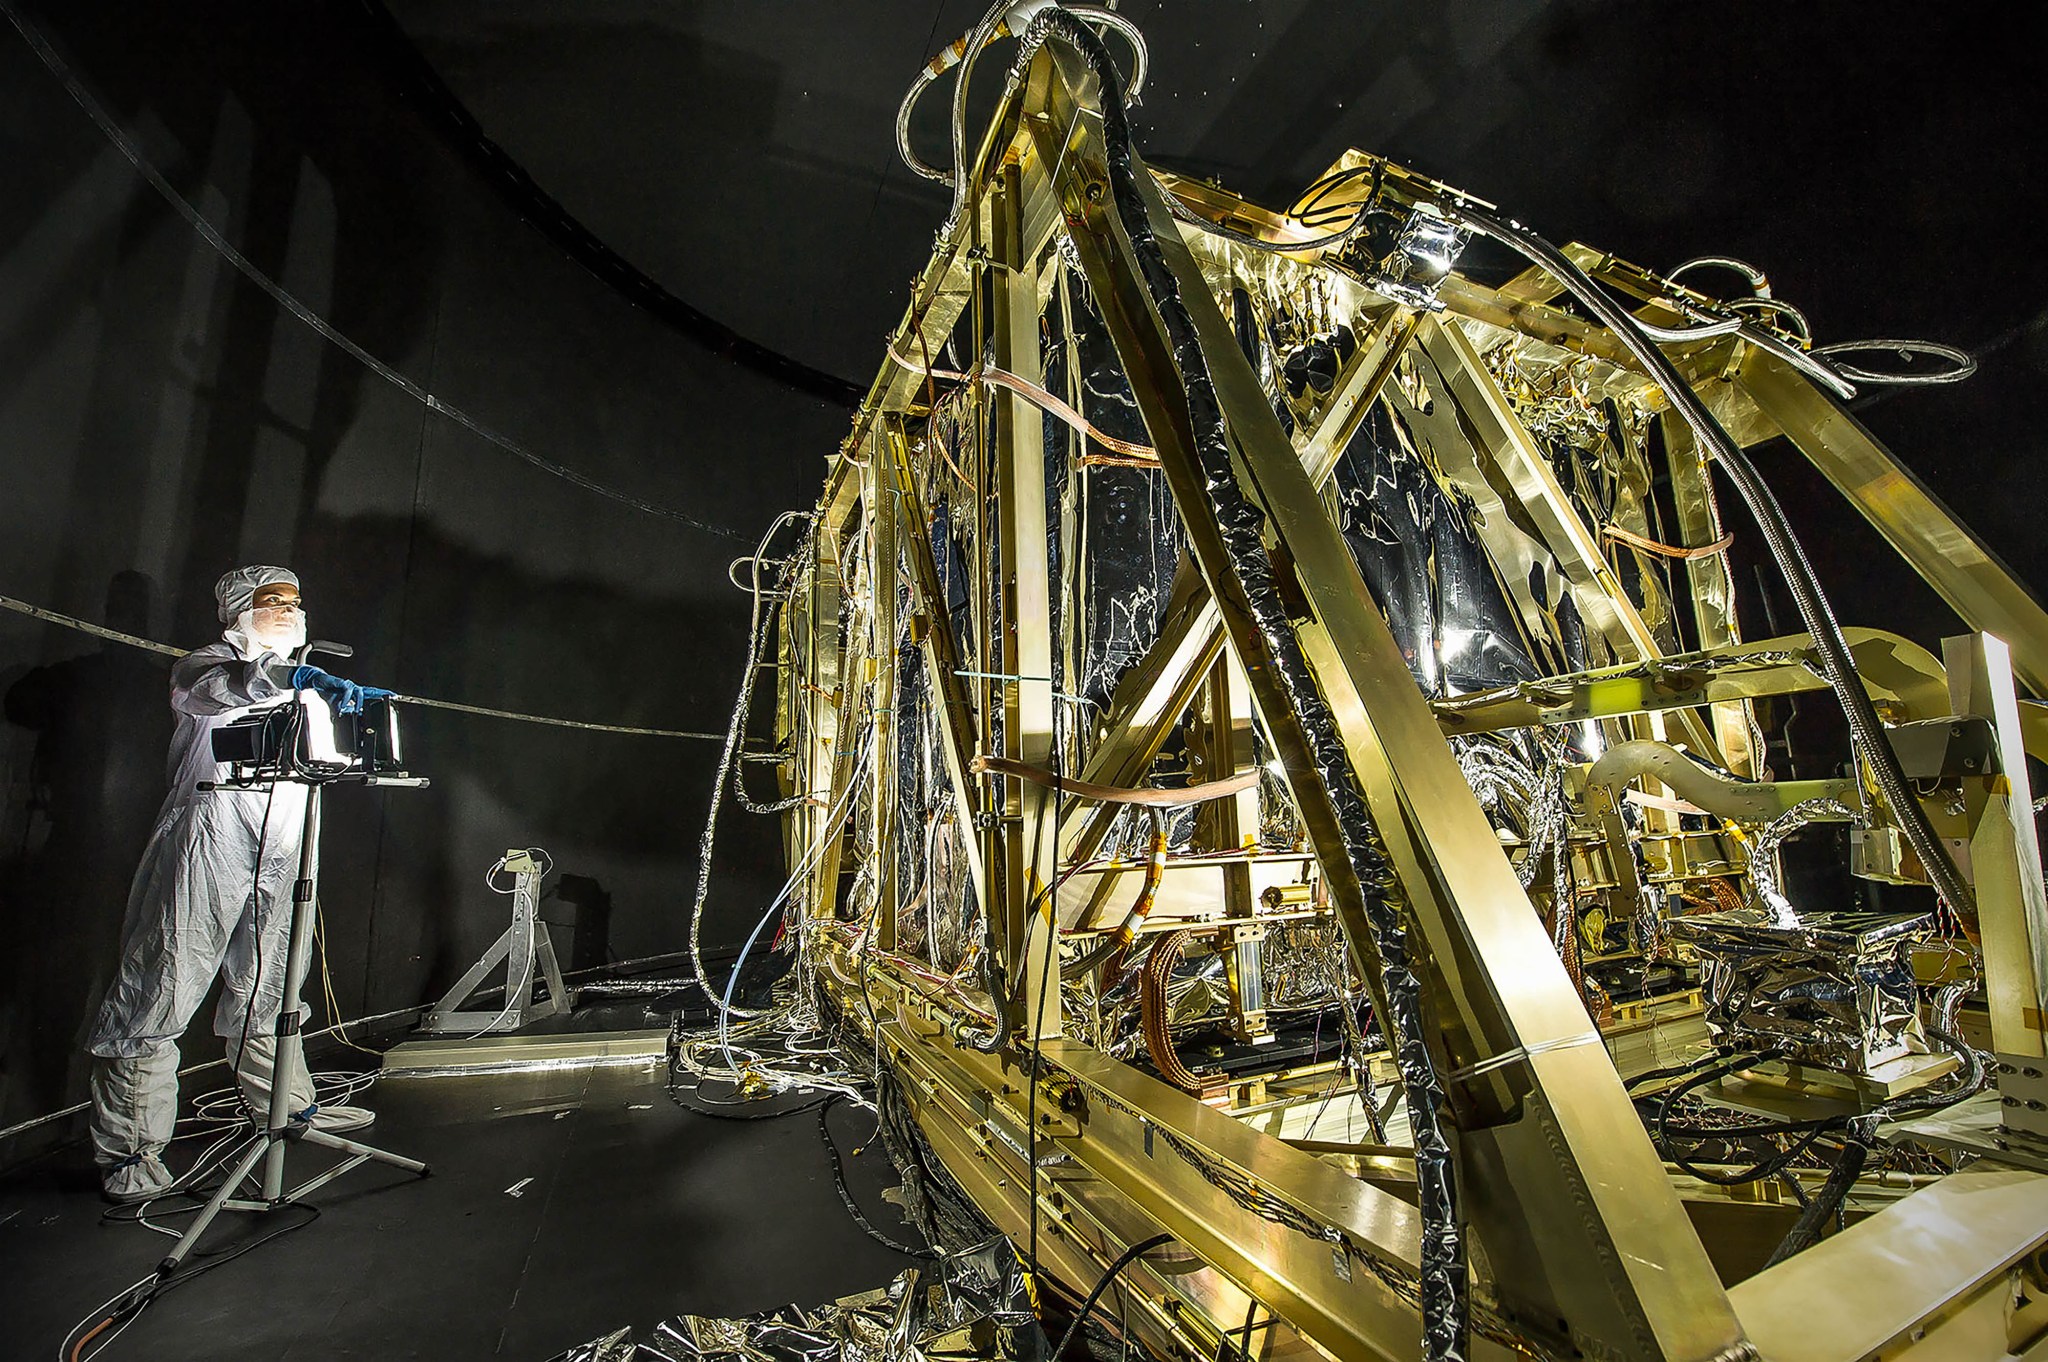 The silvery James Webb Space Telescope instrument module is enclosed in a metallic gold-colored structure. NASA photographer Desiree Stover stands to the left, holding some equipment and facing the hardware. She is wearing a white cleanroom suit. She and the hardware are inside a round, black chamber, which is inside Goddard’s large thermal vacuum chamber where the instrument is tested at its extremely cold operating temperatures.